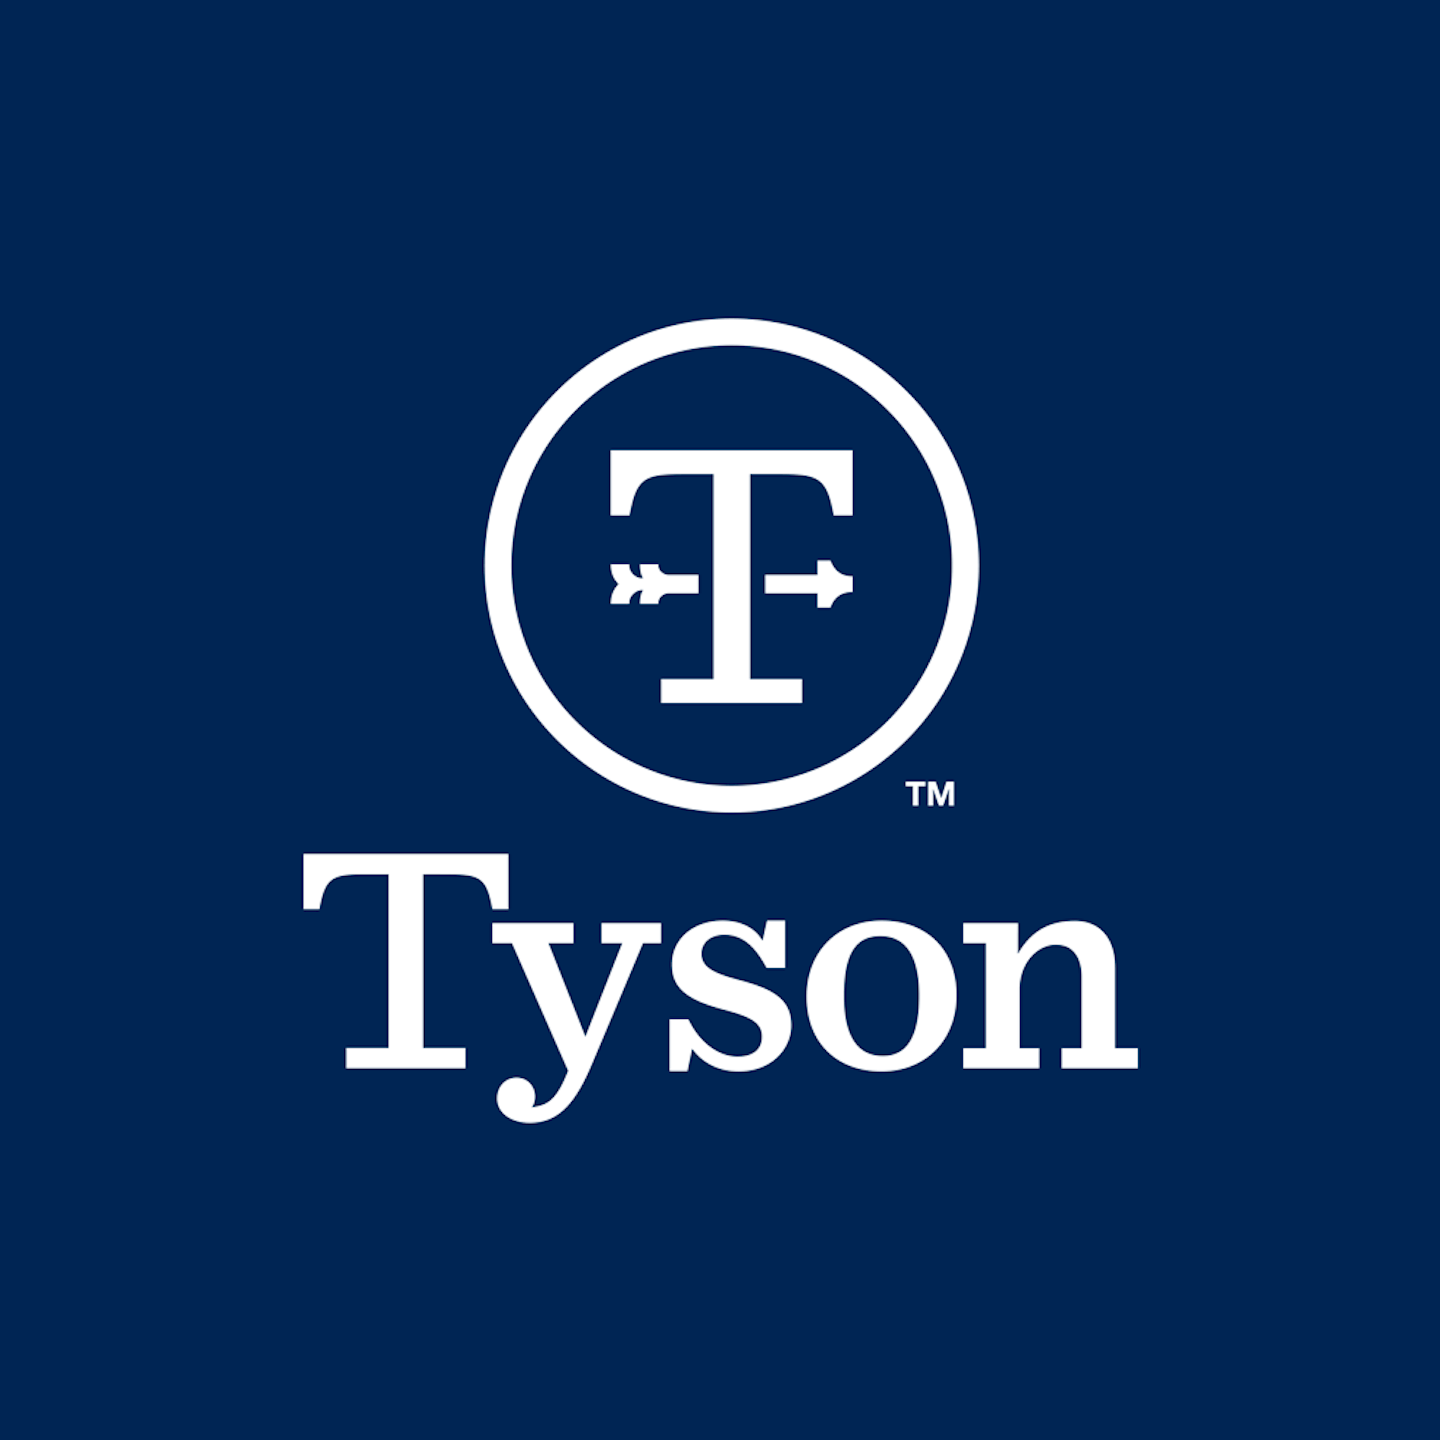 Tyson Idles 2 North Carolina Plants for Cleaning Food Manufacturing